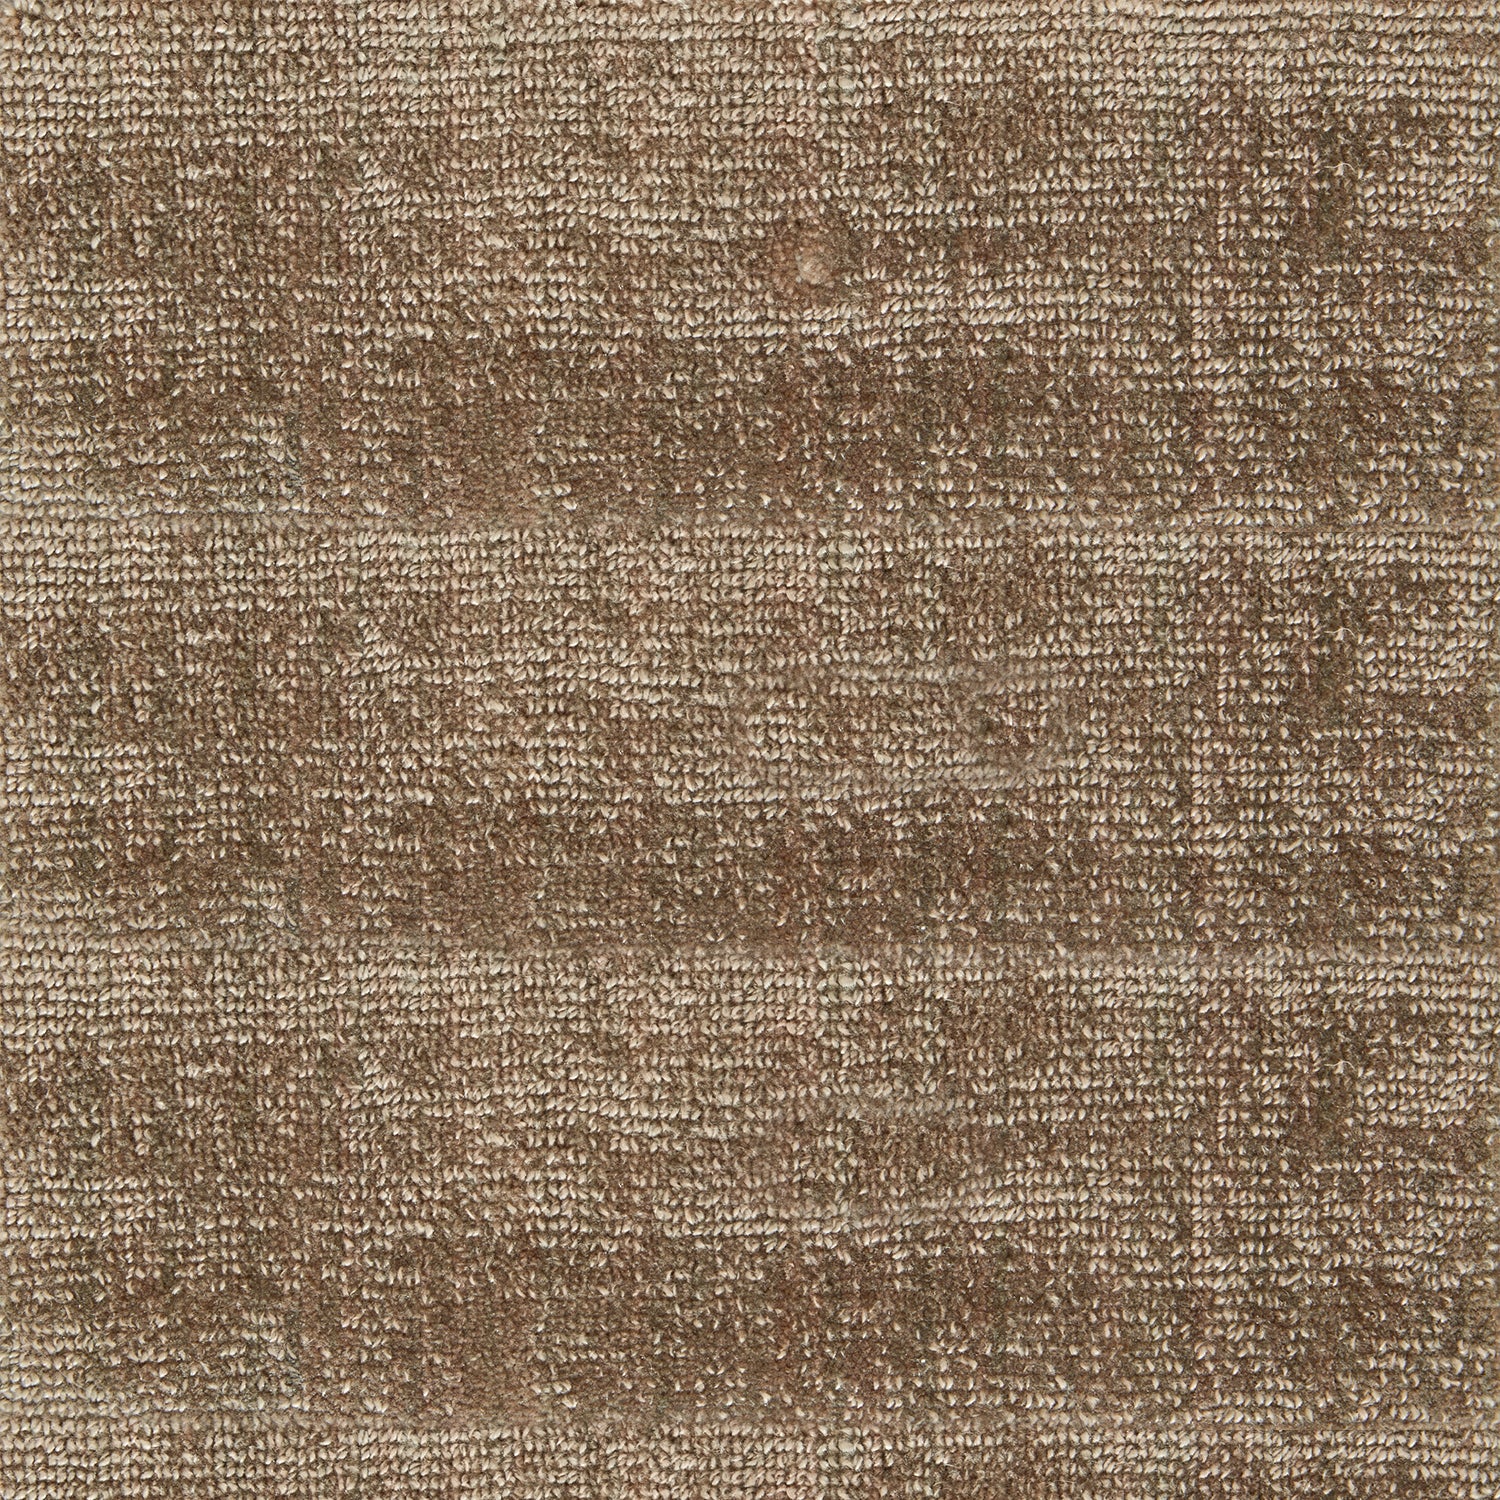 Nylon broadloom carpet swatch in a textured weave in mottled sable.